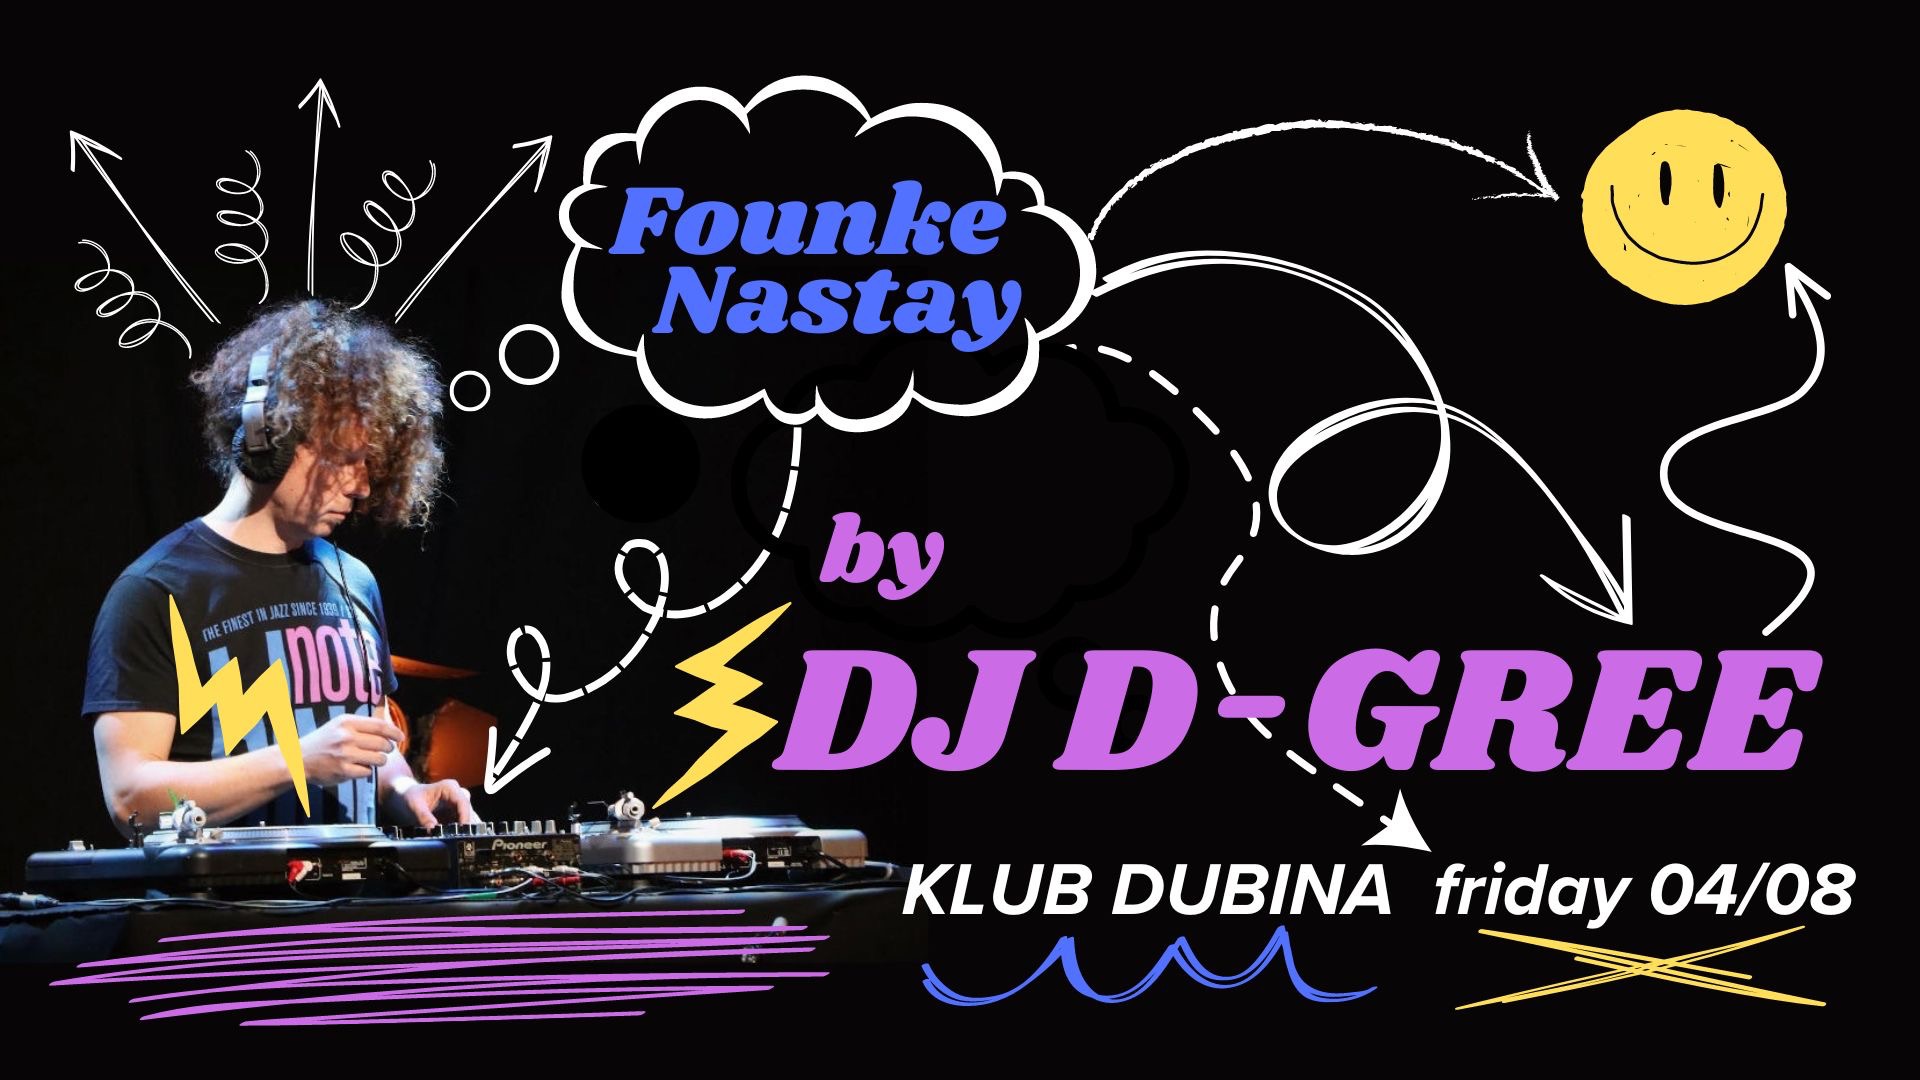 DJ D-Gree brings heat on our dancefloor with his flamable mix of disco, afrobeat, funk and soul music... DJ D-Gree a.k.a. Leo Hekman is a resident DJ of Funk Club in Zagreb and host of Radio 808’s Founke Nastay Show.